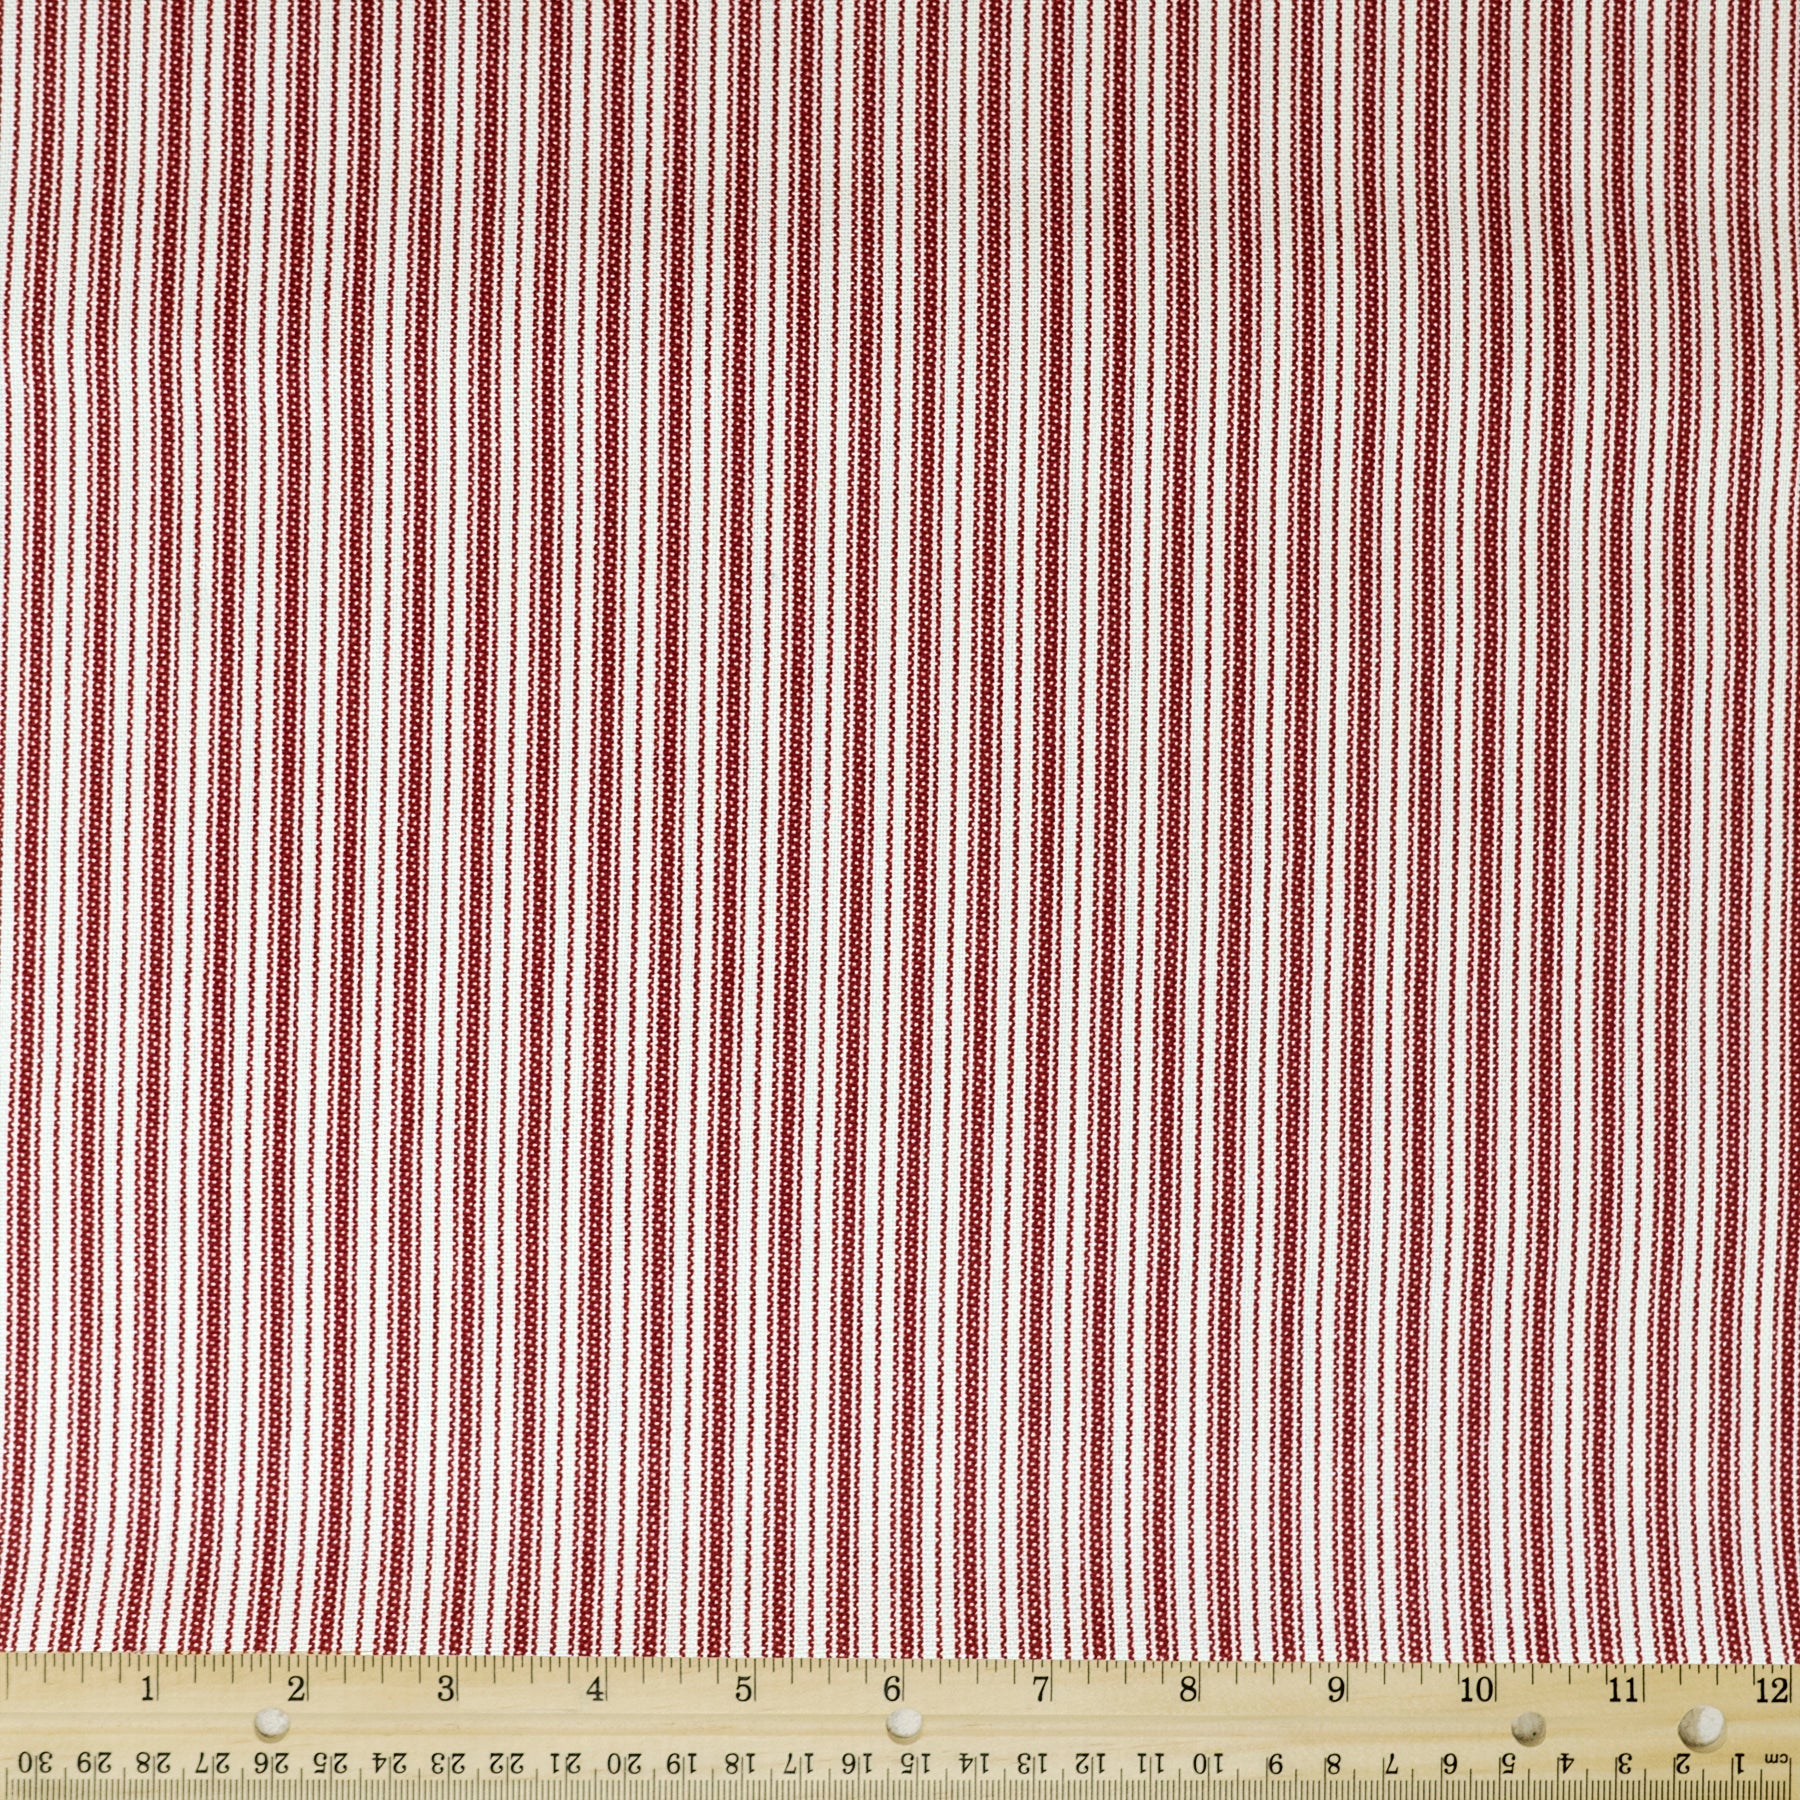 Waverly Inspirations 100% Cotton Duck 54" Ticking Red Color Sewing Fabric by the Yard